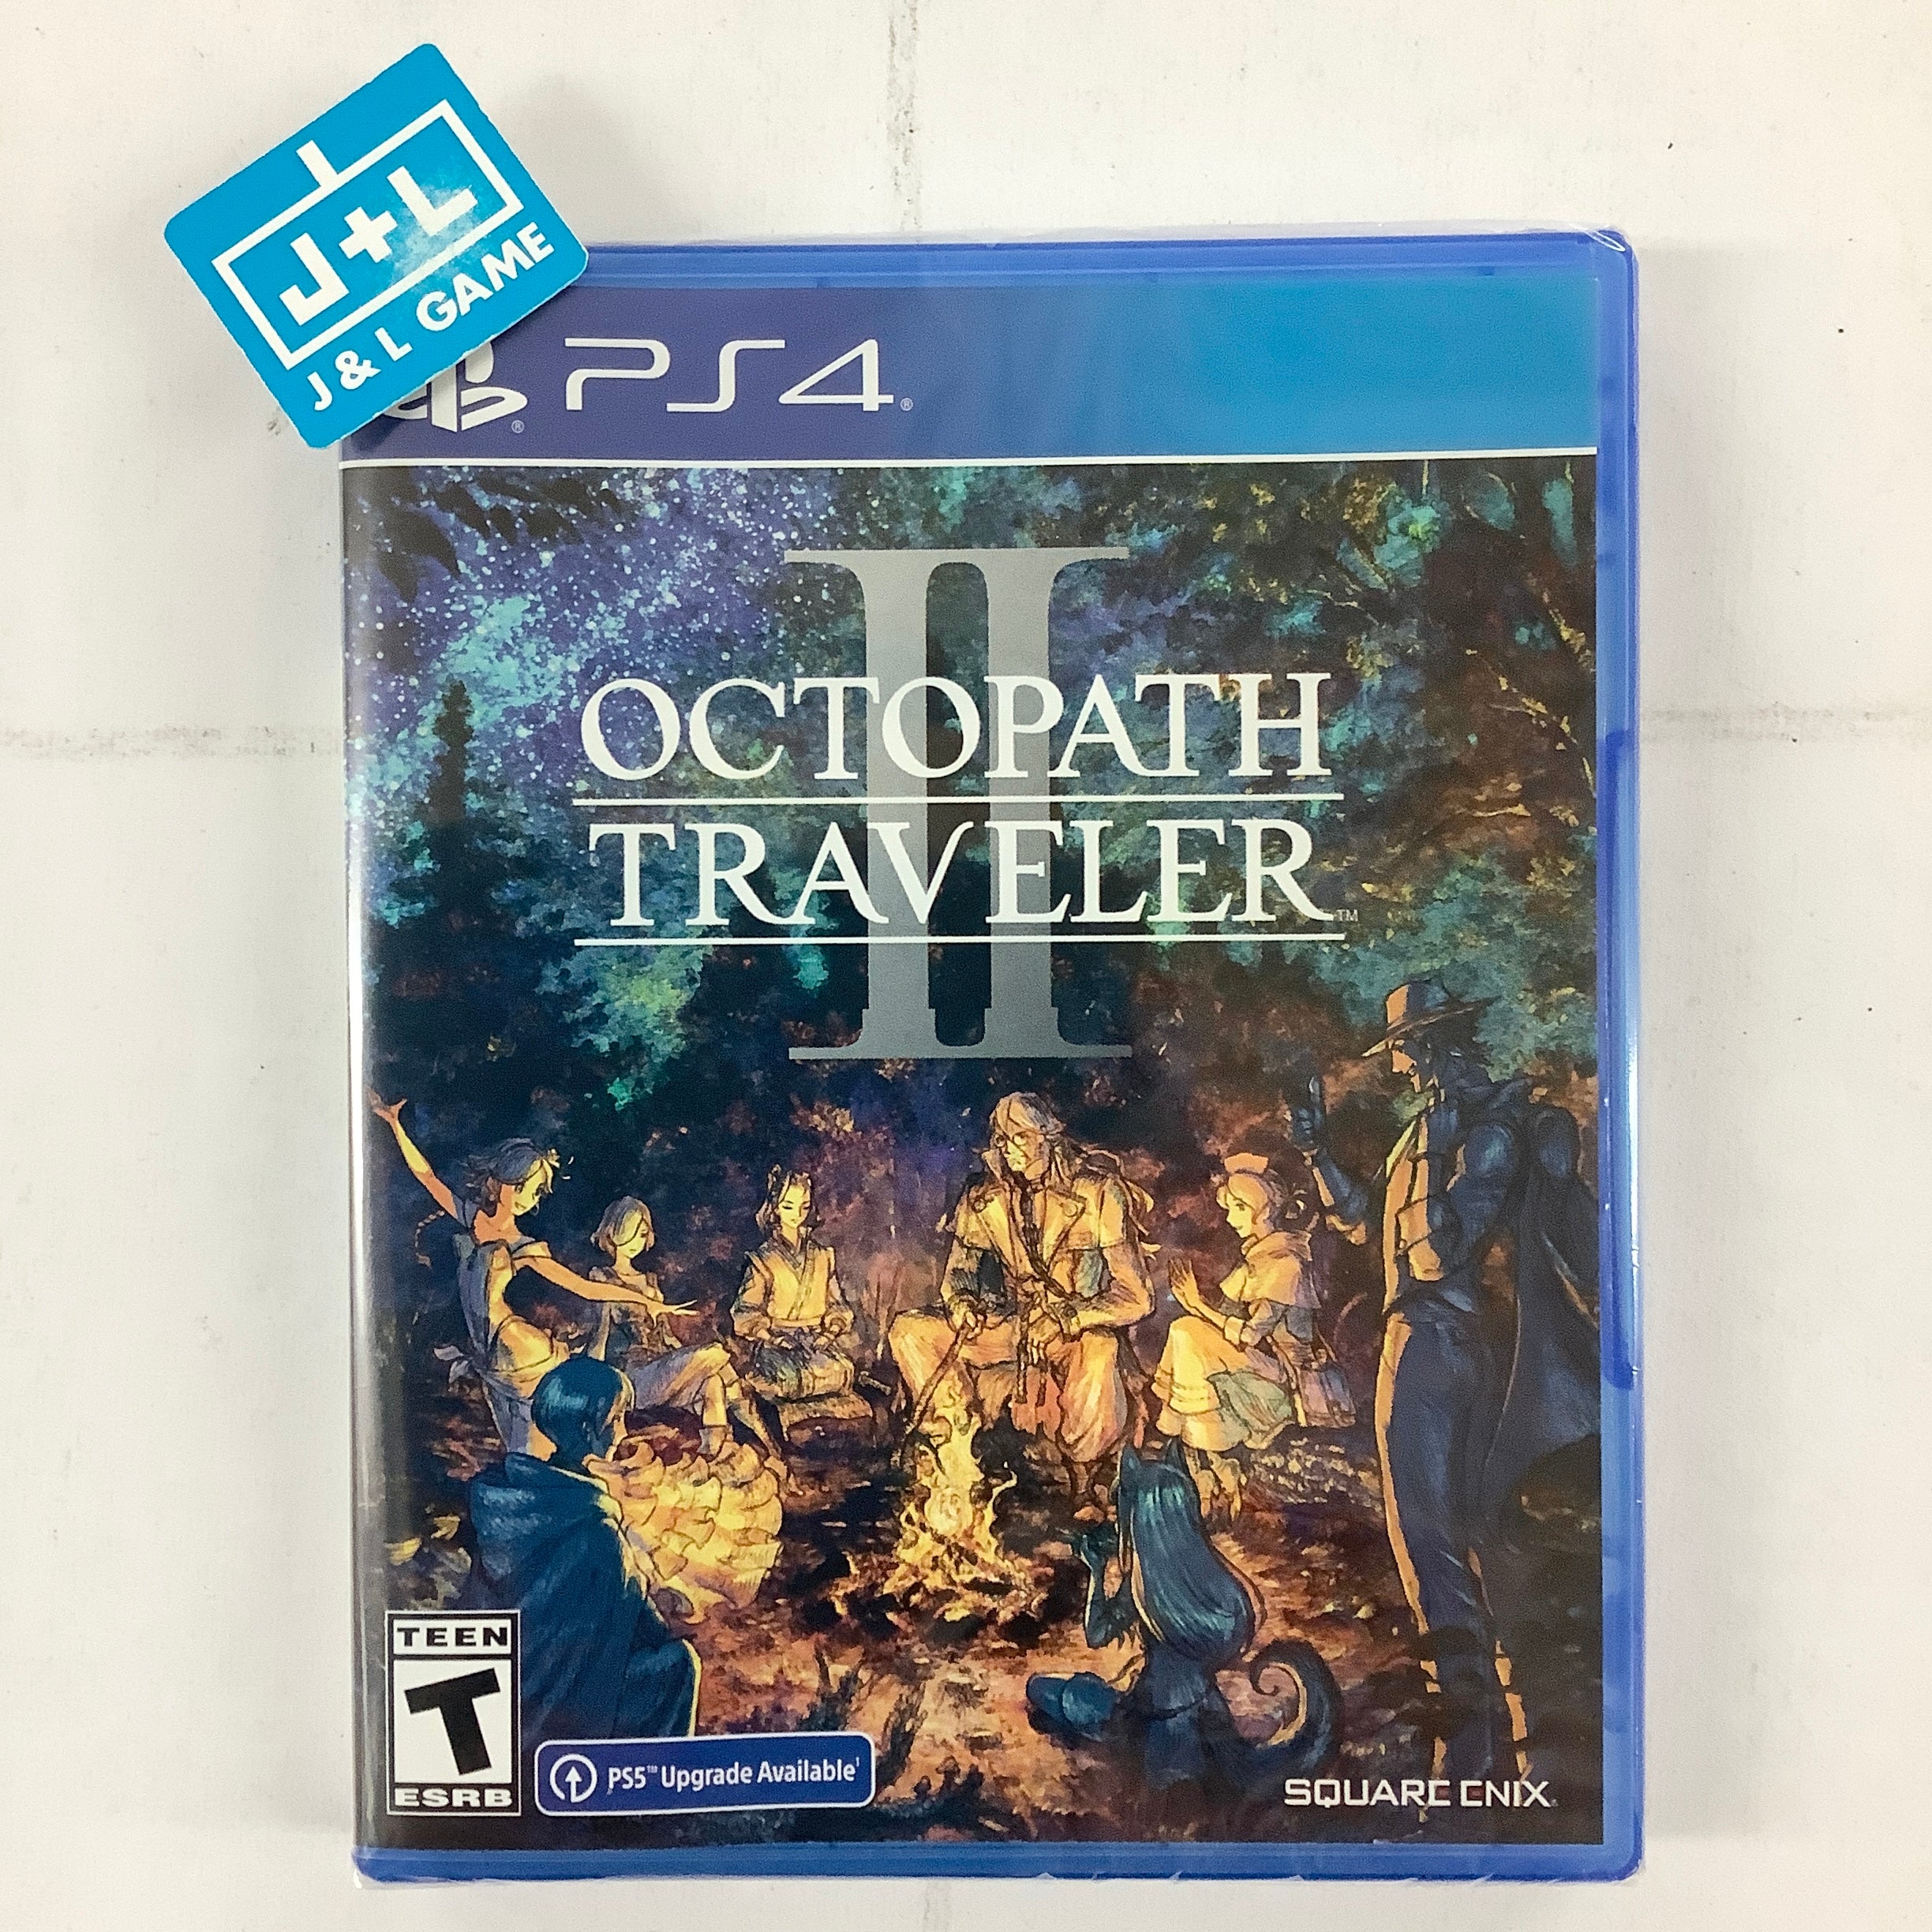 Octopath Traveler II - (PS4) PlayStation 4 Video Games Square Enix   